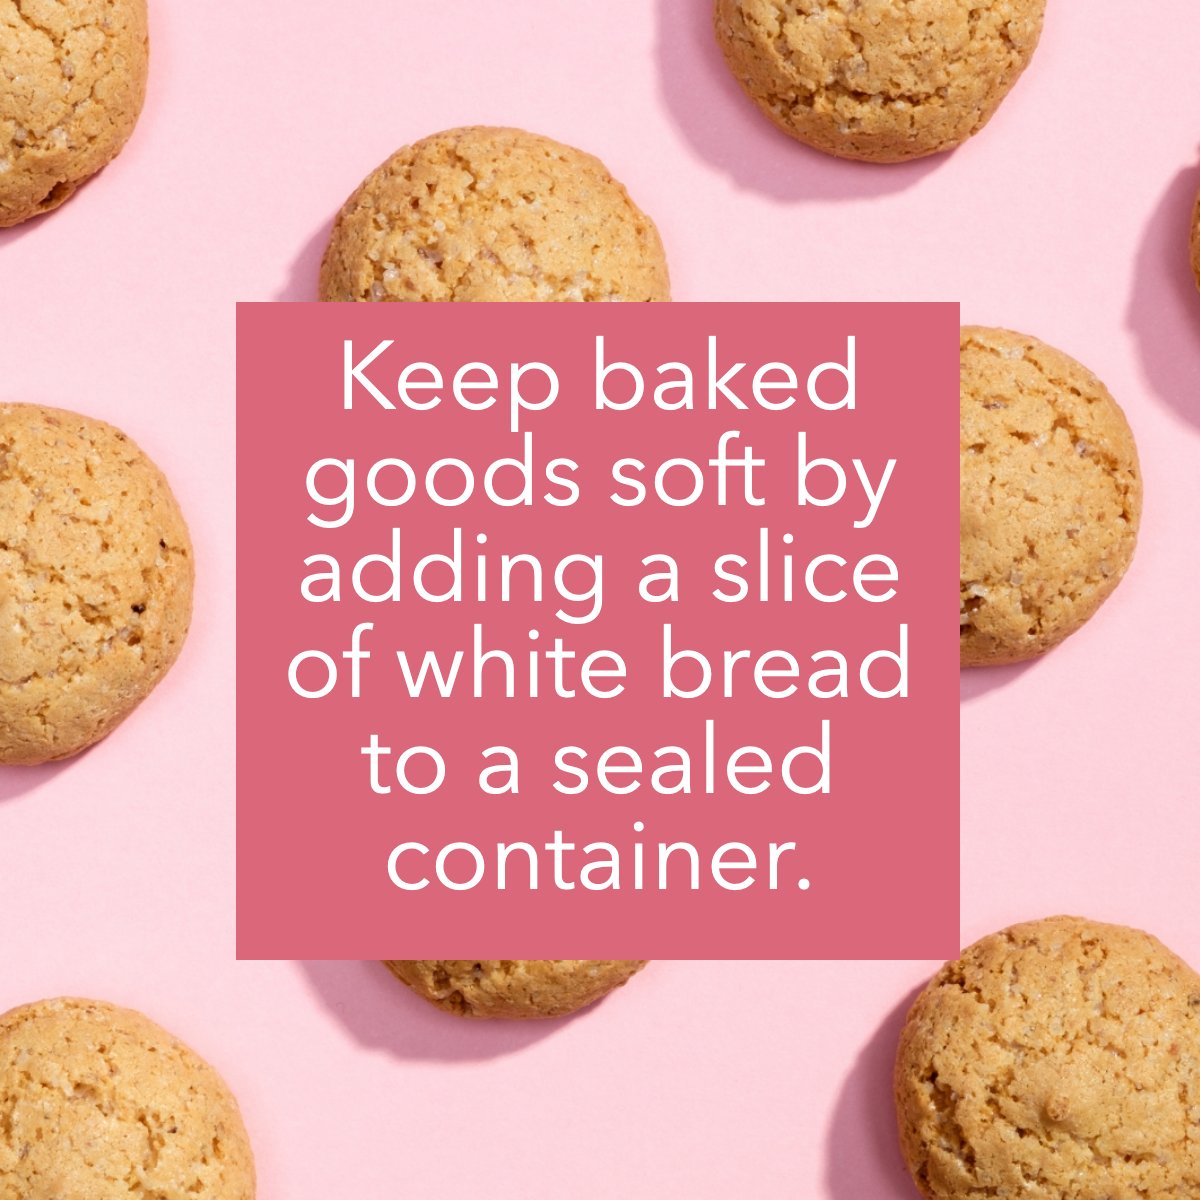 Ready for a #bakinghack?

Keep baked goods soft by adding a slice of white bread 🍞 to a sealed container.

What's the best kind of cookie 🍪? Let us know in the comments!

#cookies #pink #baking #kitchenhack #funfact #bakingtips
 #lakelivingpa #lakelife